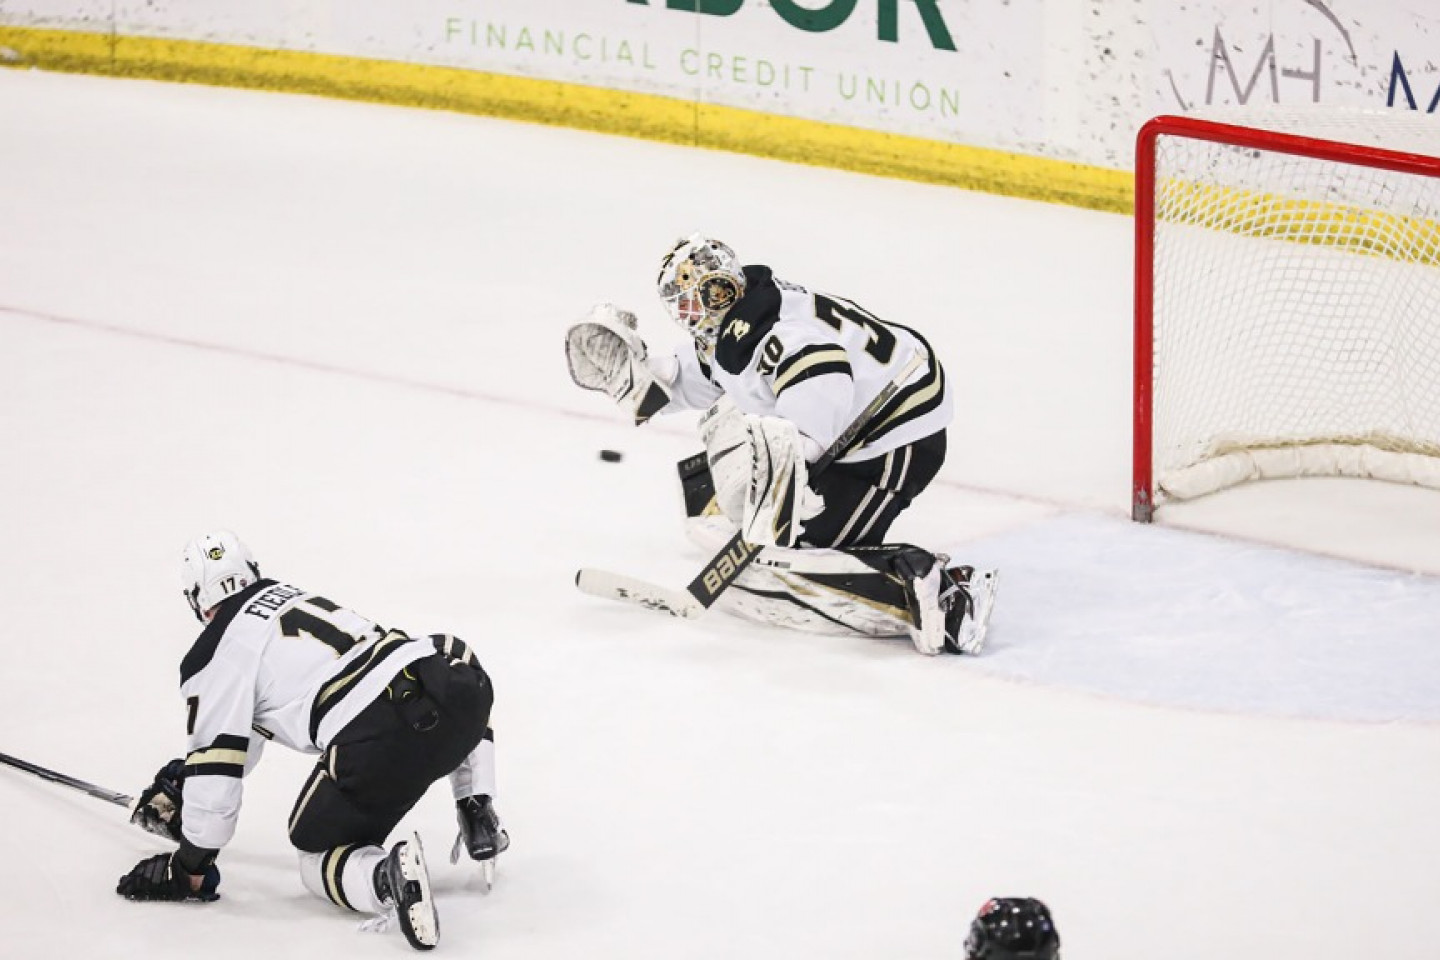 Bronco Hockey goalie Dylan Bussi stops a puck during a hockey game.